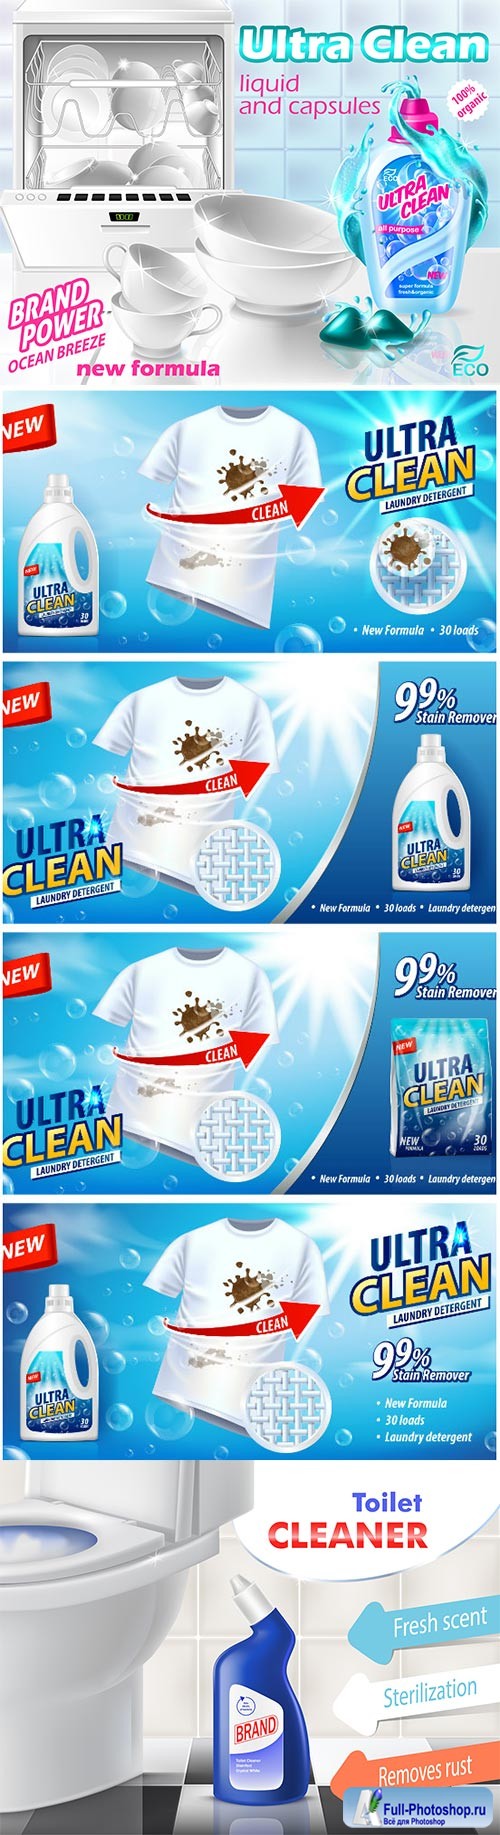 Mockup for brand advertising vector design, laundry detergent, liquid cleaner and capsules for dishwasher